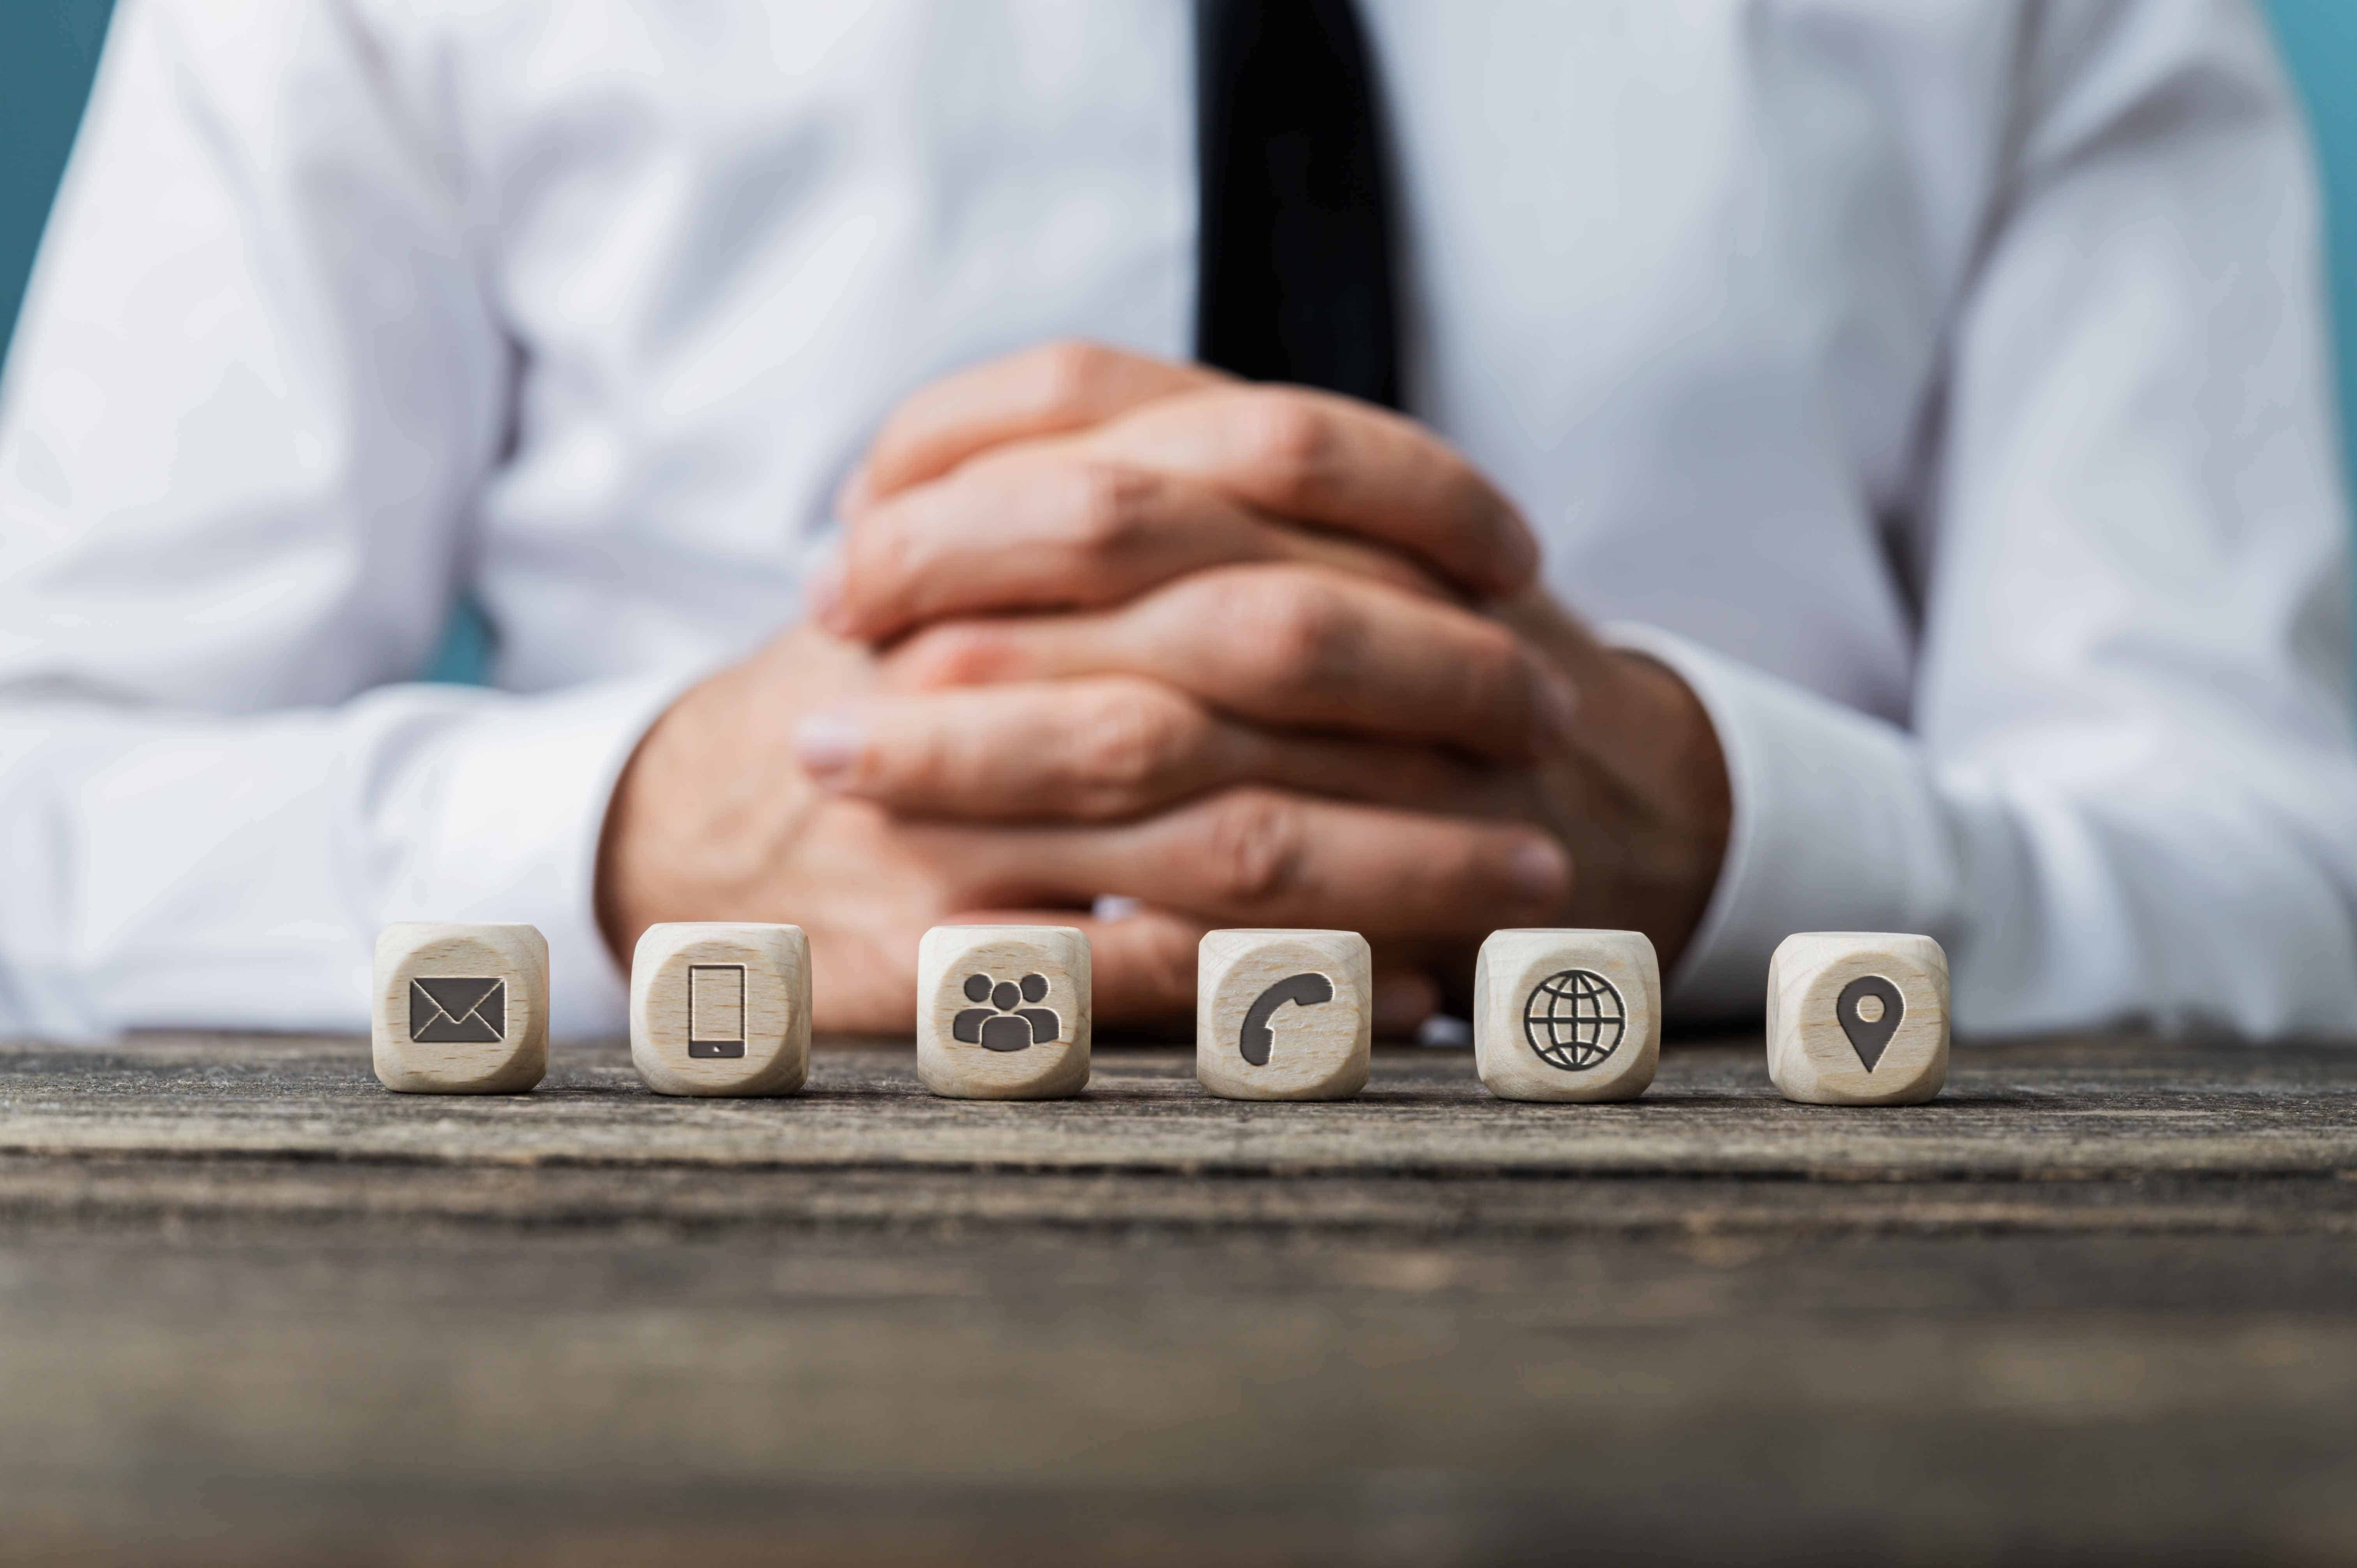 Customer service and help concept - business operator sitting at rustic wooden desk with six dices with contact and information symbols on them placed in a row.